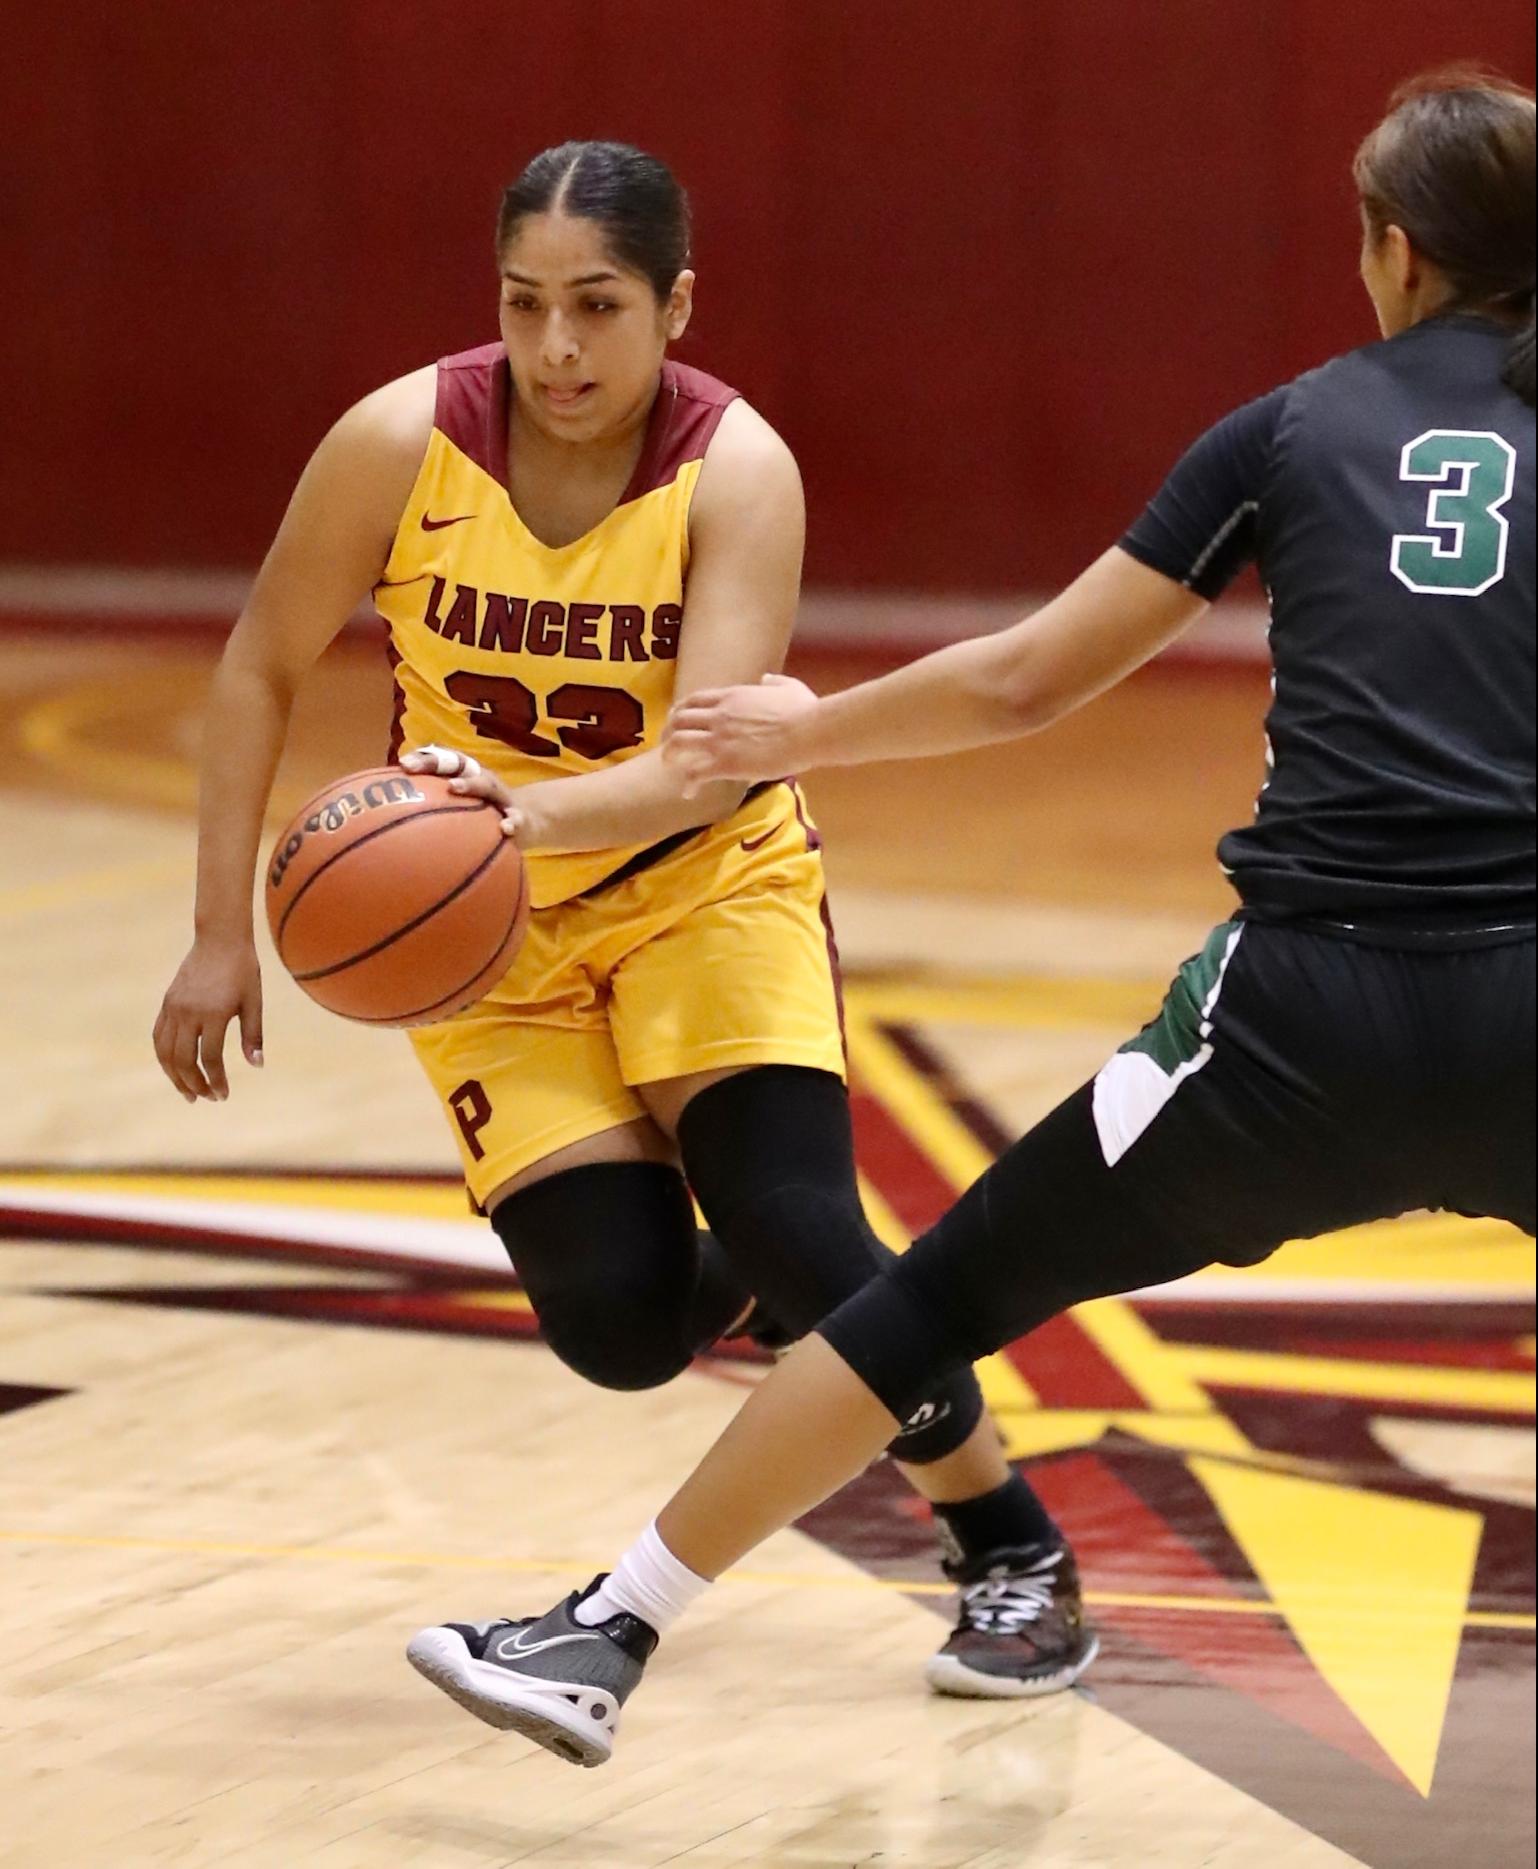 Lupe Vazquez dribbles it up court v. East LA in PCC's loss Friday night (photo by Michael Watkins, Athletics).